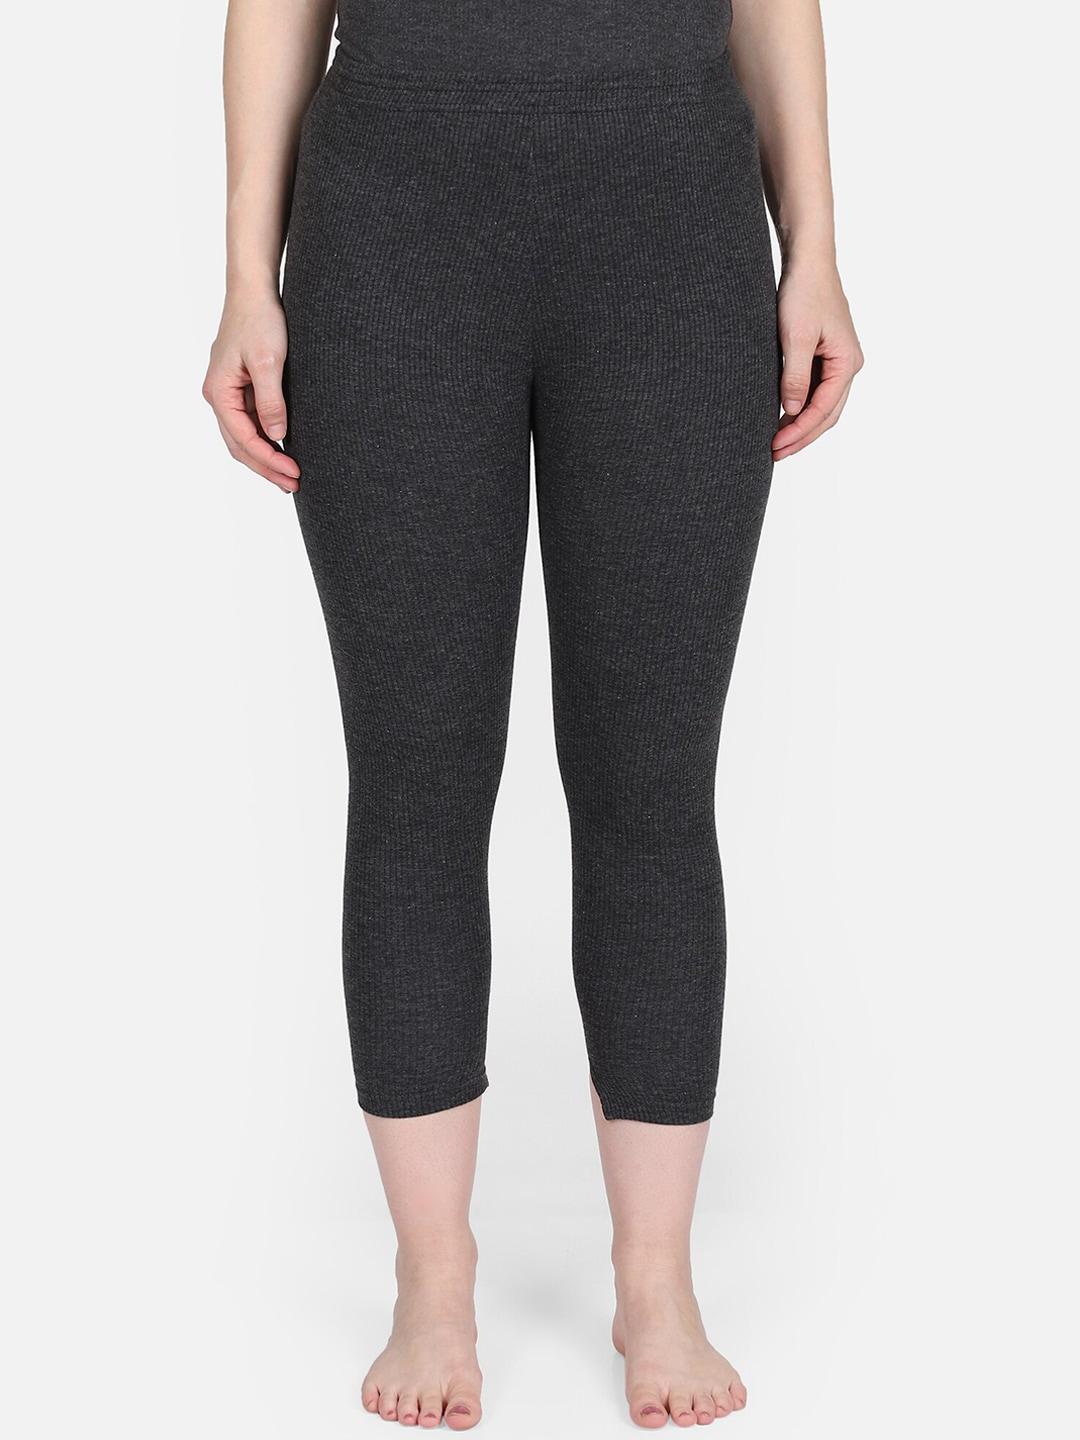 bodycare insider women charcoal-grey solid thermal bottoms